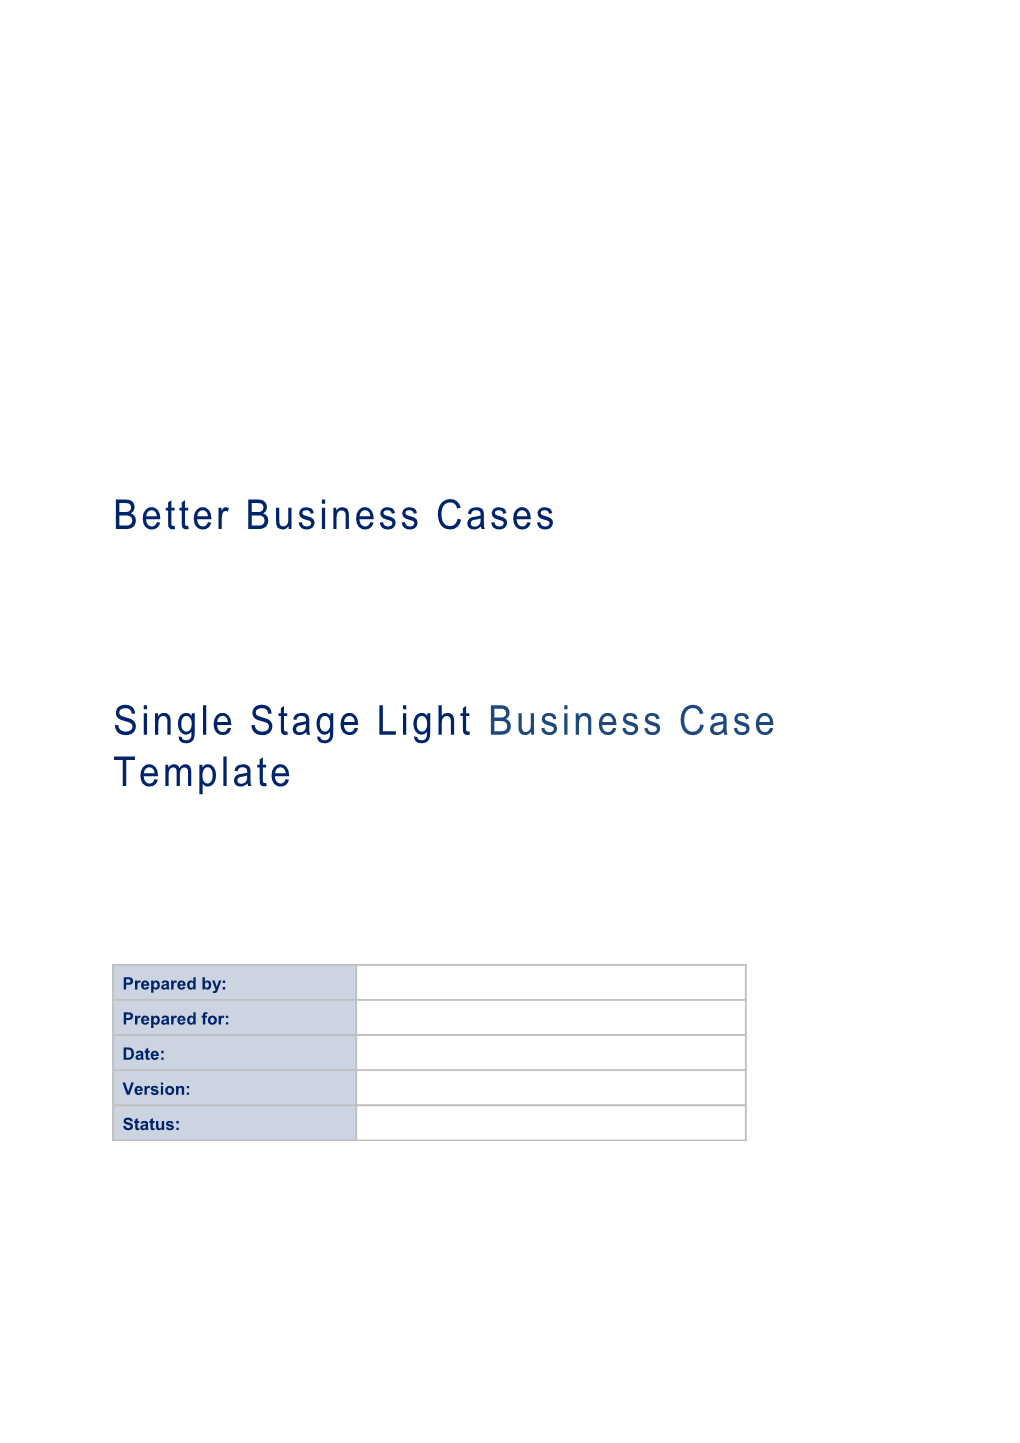 Better Business Cases: Single Stage Light Business Case Template